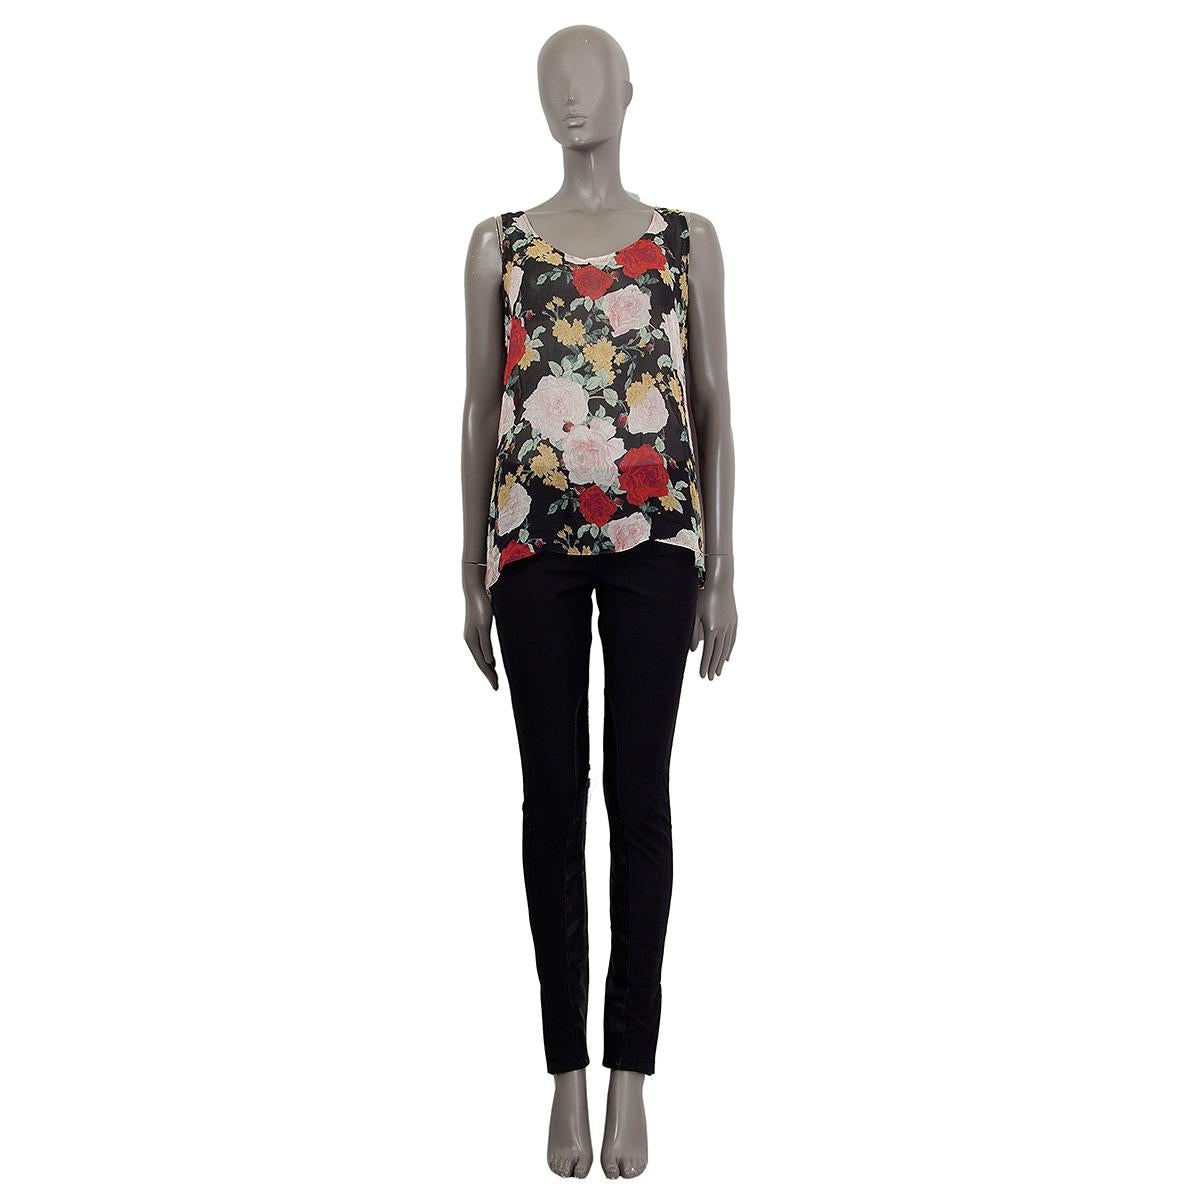 100% authentic Zimmermann sheer tank-top in black, red, rose, yellow and green silk (100%) with a casual fit, round neckline and floral print. Unlined. Has been worn and is in excellent condition. 

Measurements
Tag Size	2
Size	M
Shoulder Width	34cm